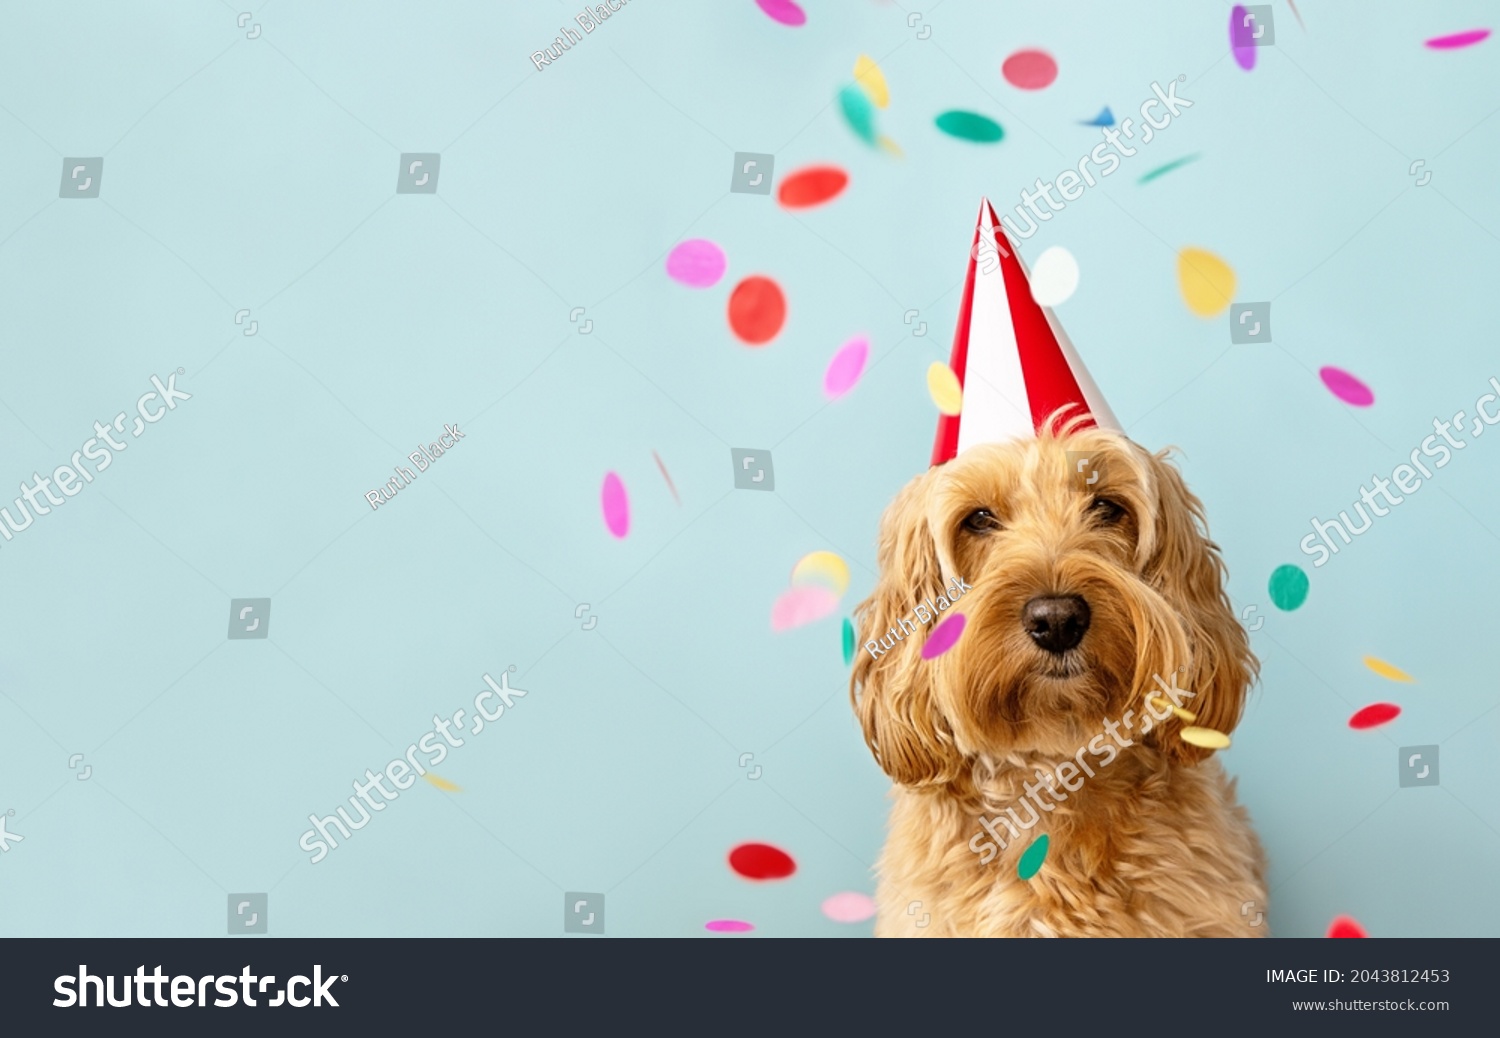 Cute dog celebrating at a birthday party with confetti and party hat #2043812453